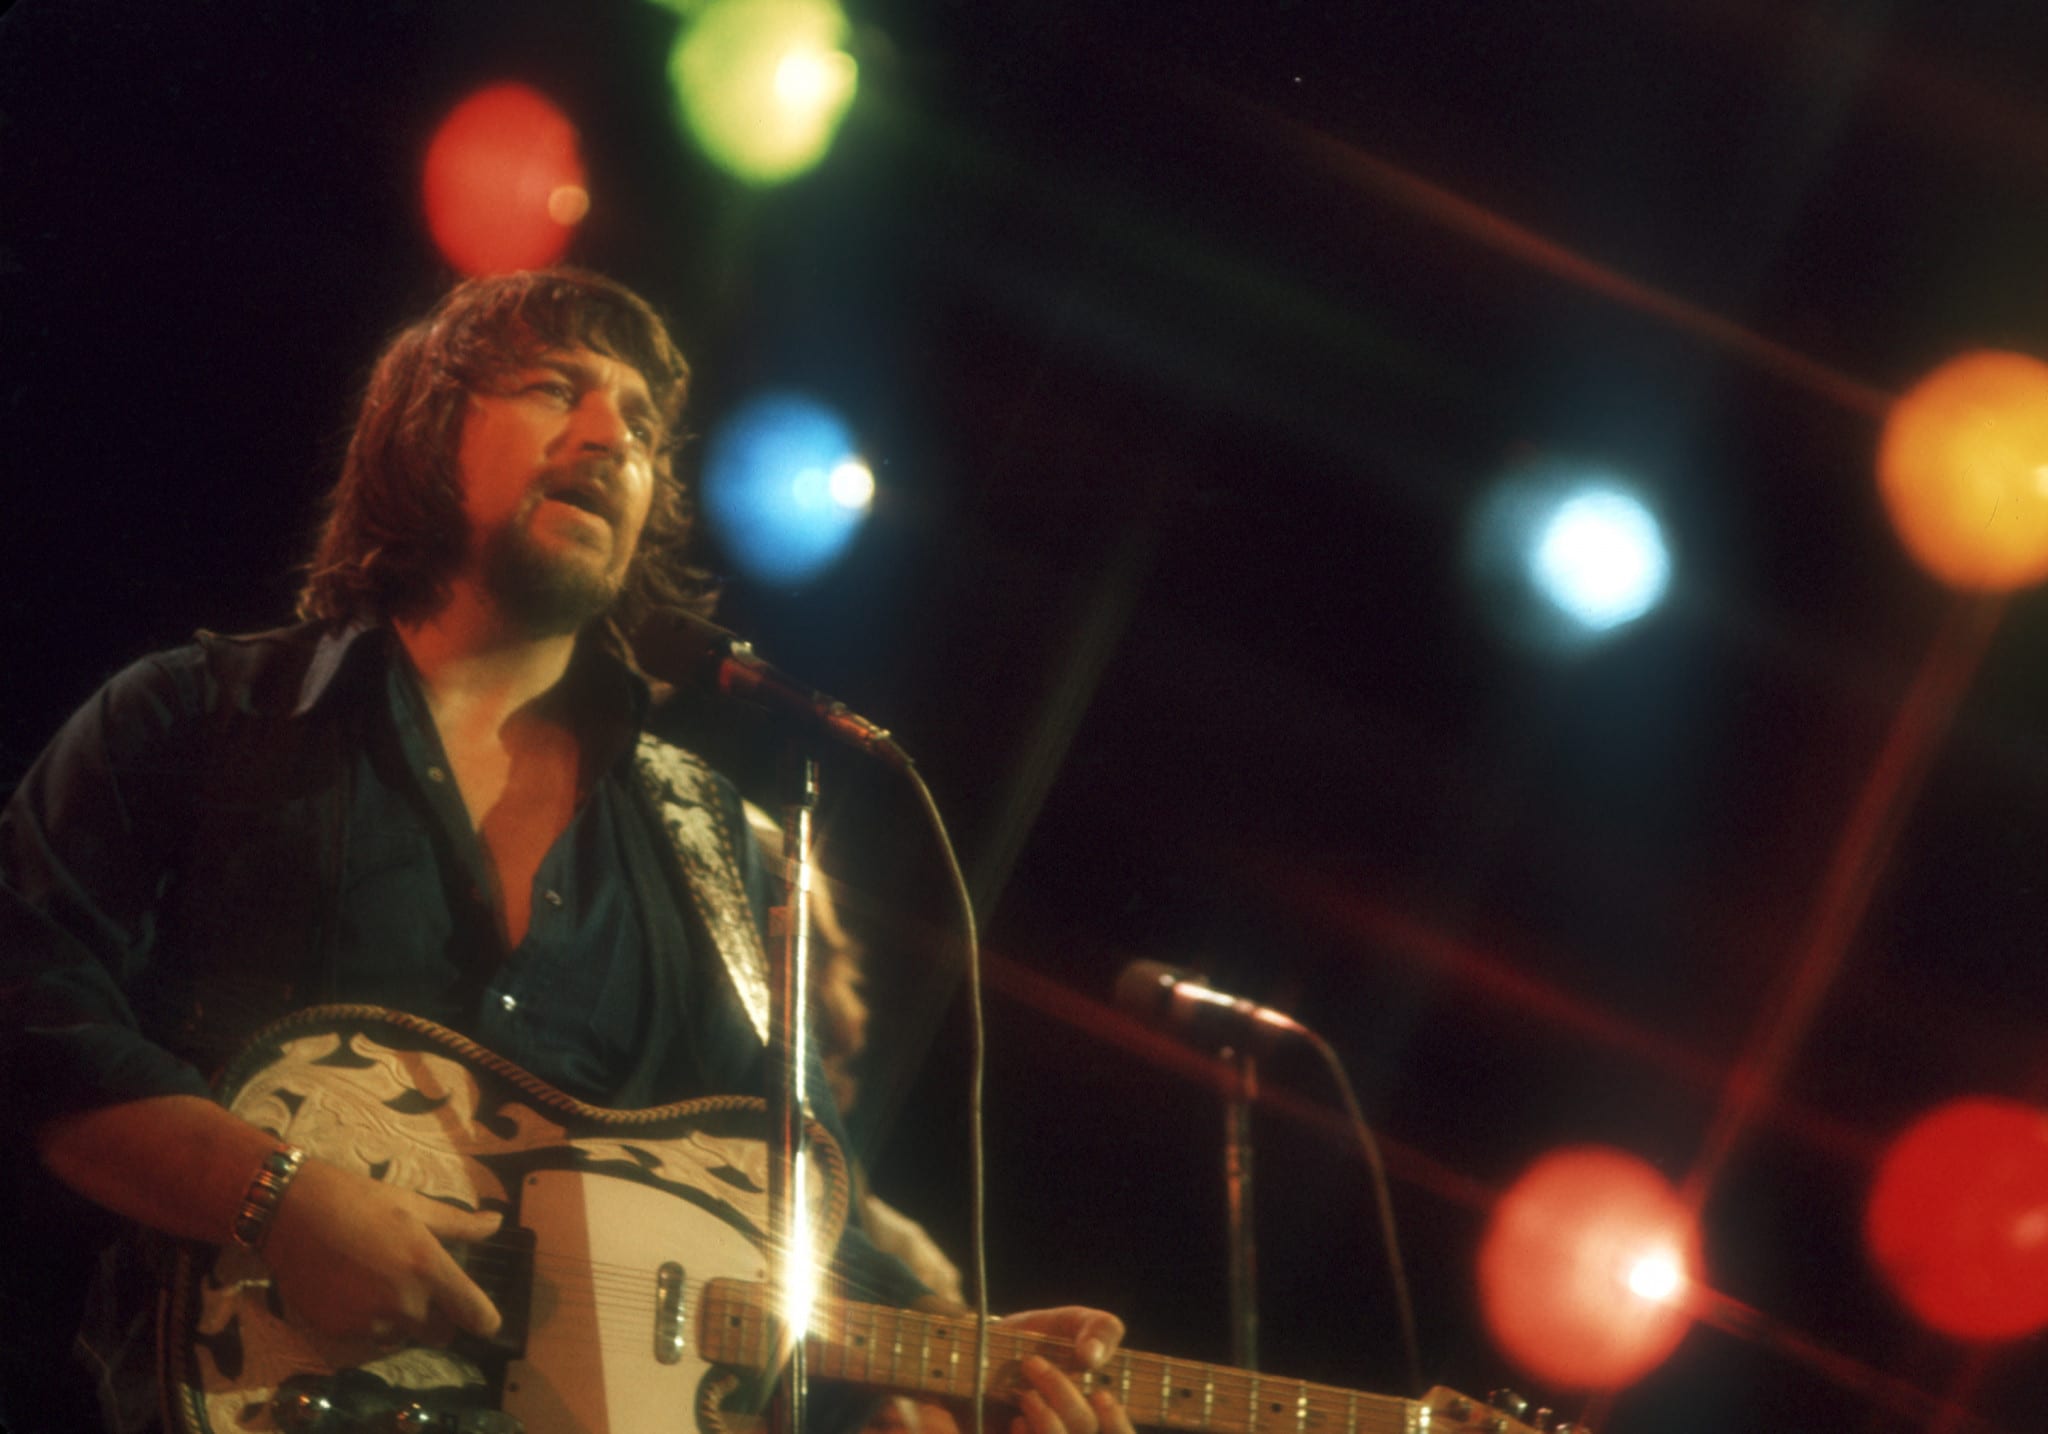 Waylon Jennings is a country singer from Texas